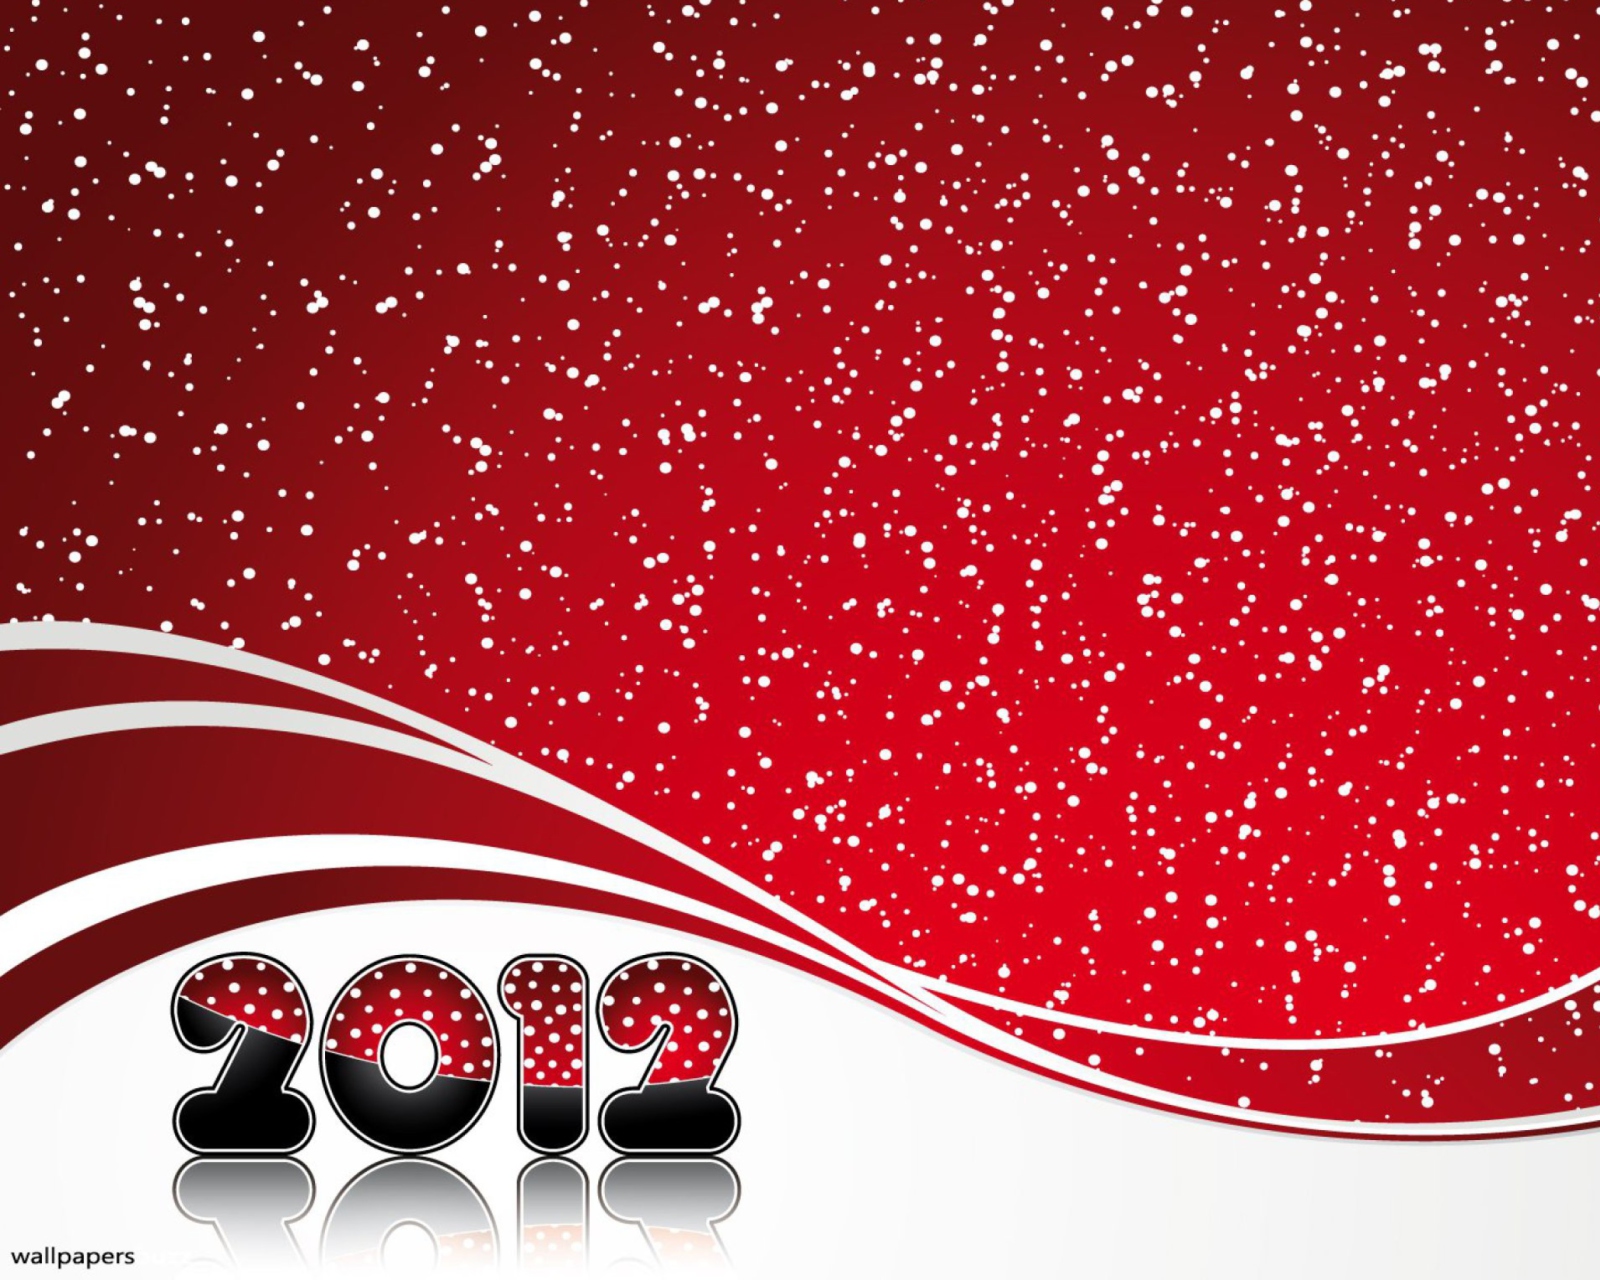 Red Snow New Year wallpaper 1600x1280